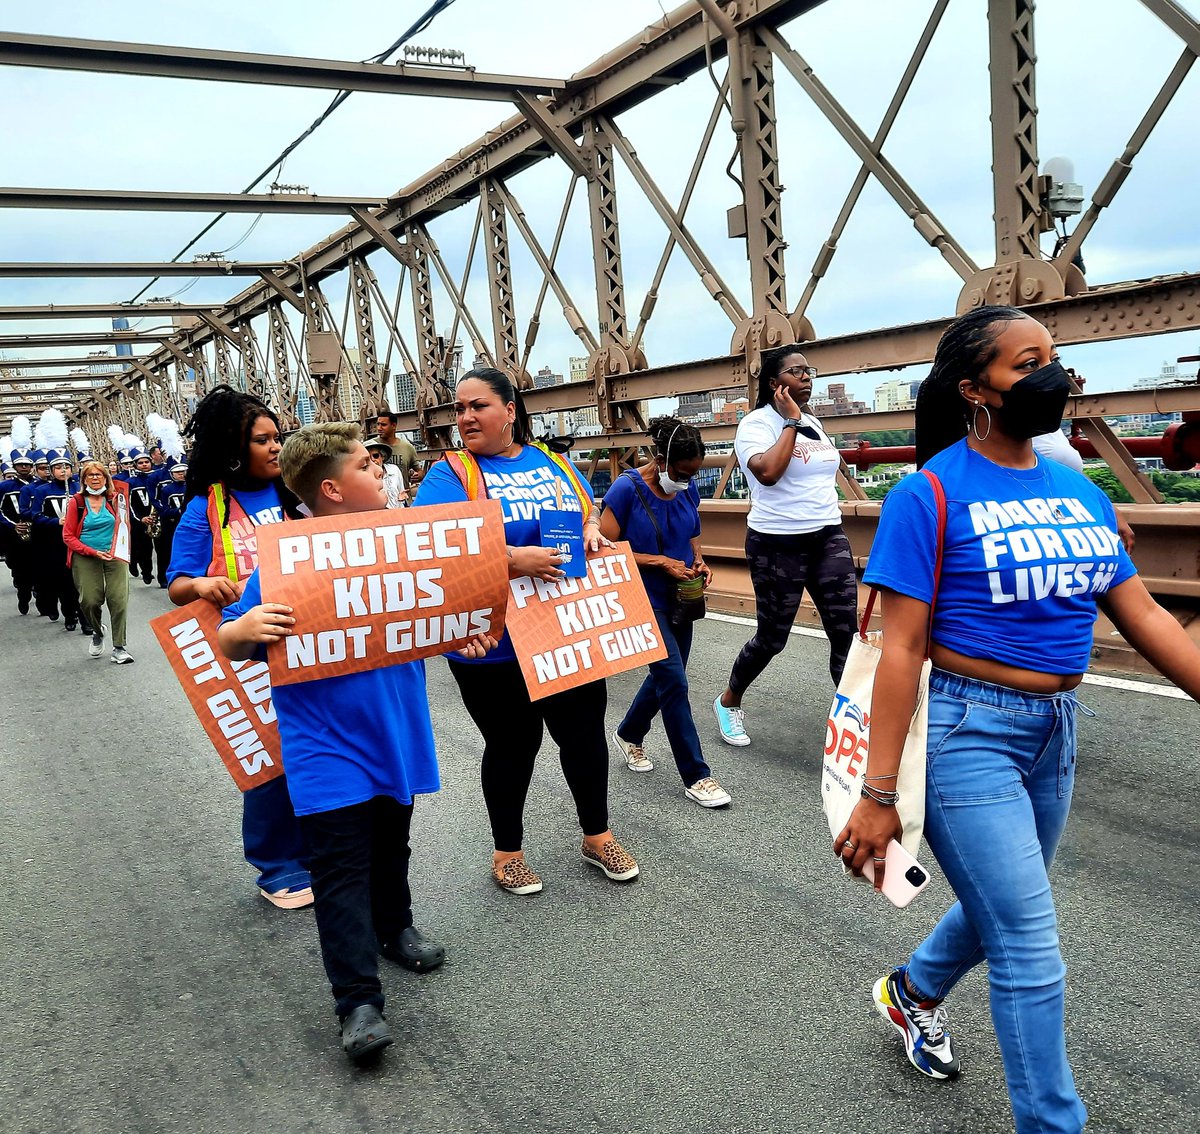 Lots of young people marching across the Brooklyn Bridge today, demanding that our politicians show they value the lives of our youth and pass gun safety measures.
#MarchForOurLives #MarchForOurLivesJune11 #EndGunViolence #ProtectOurKids